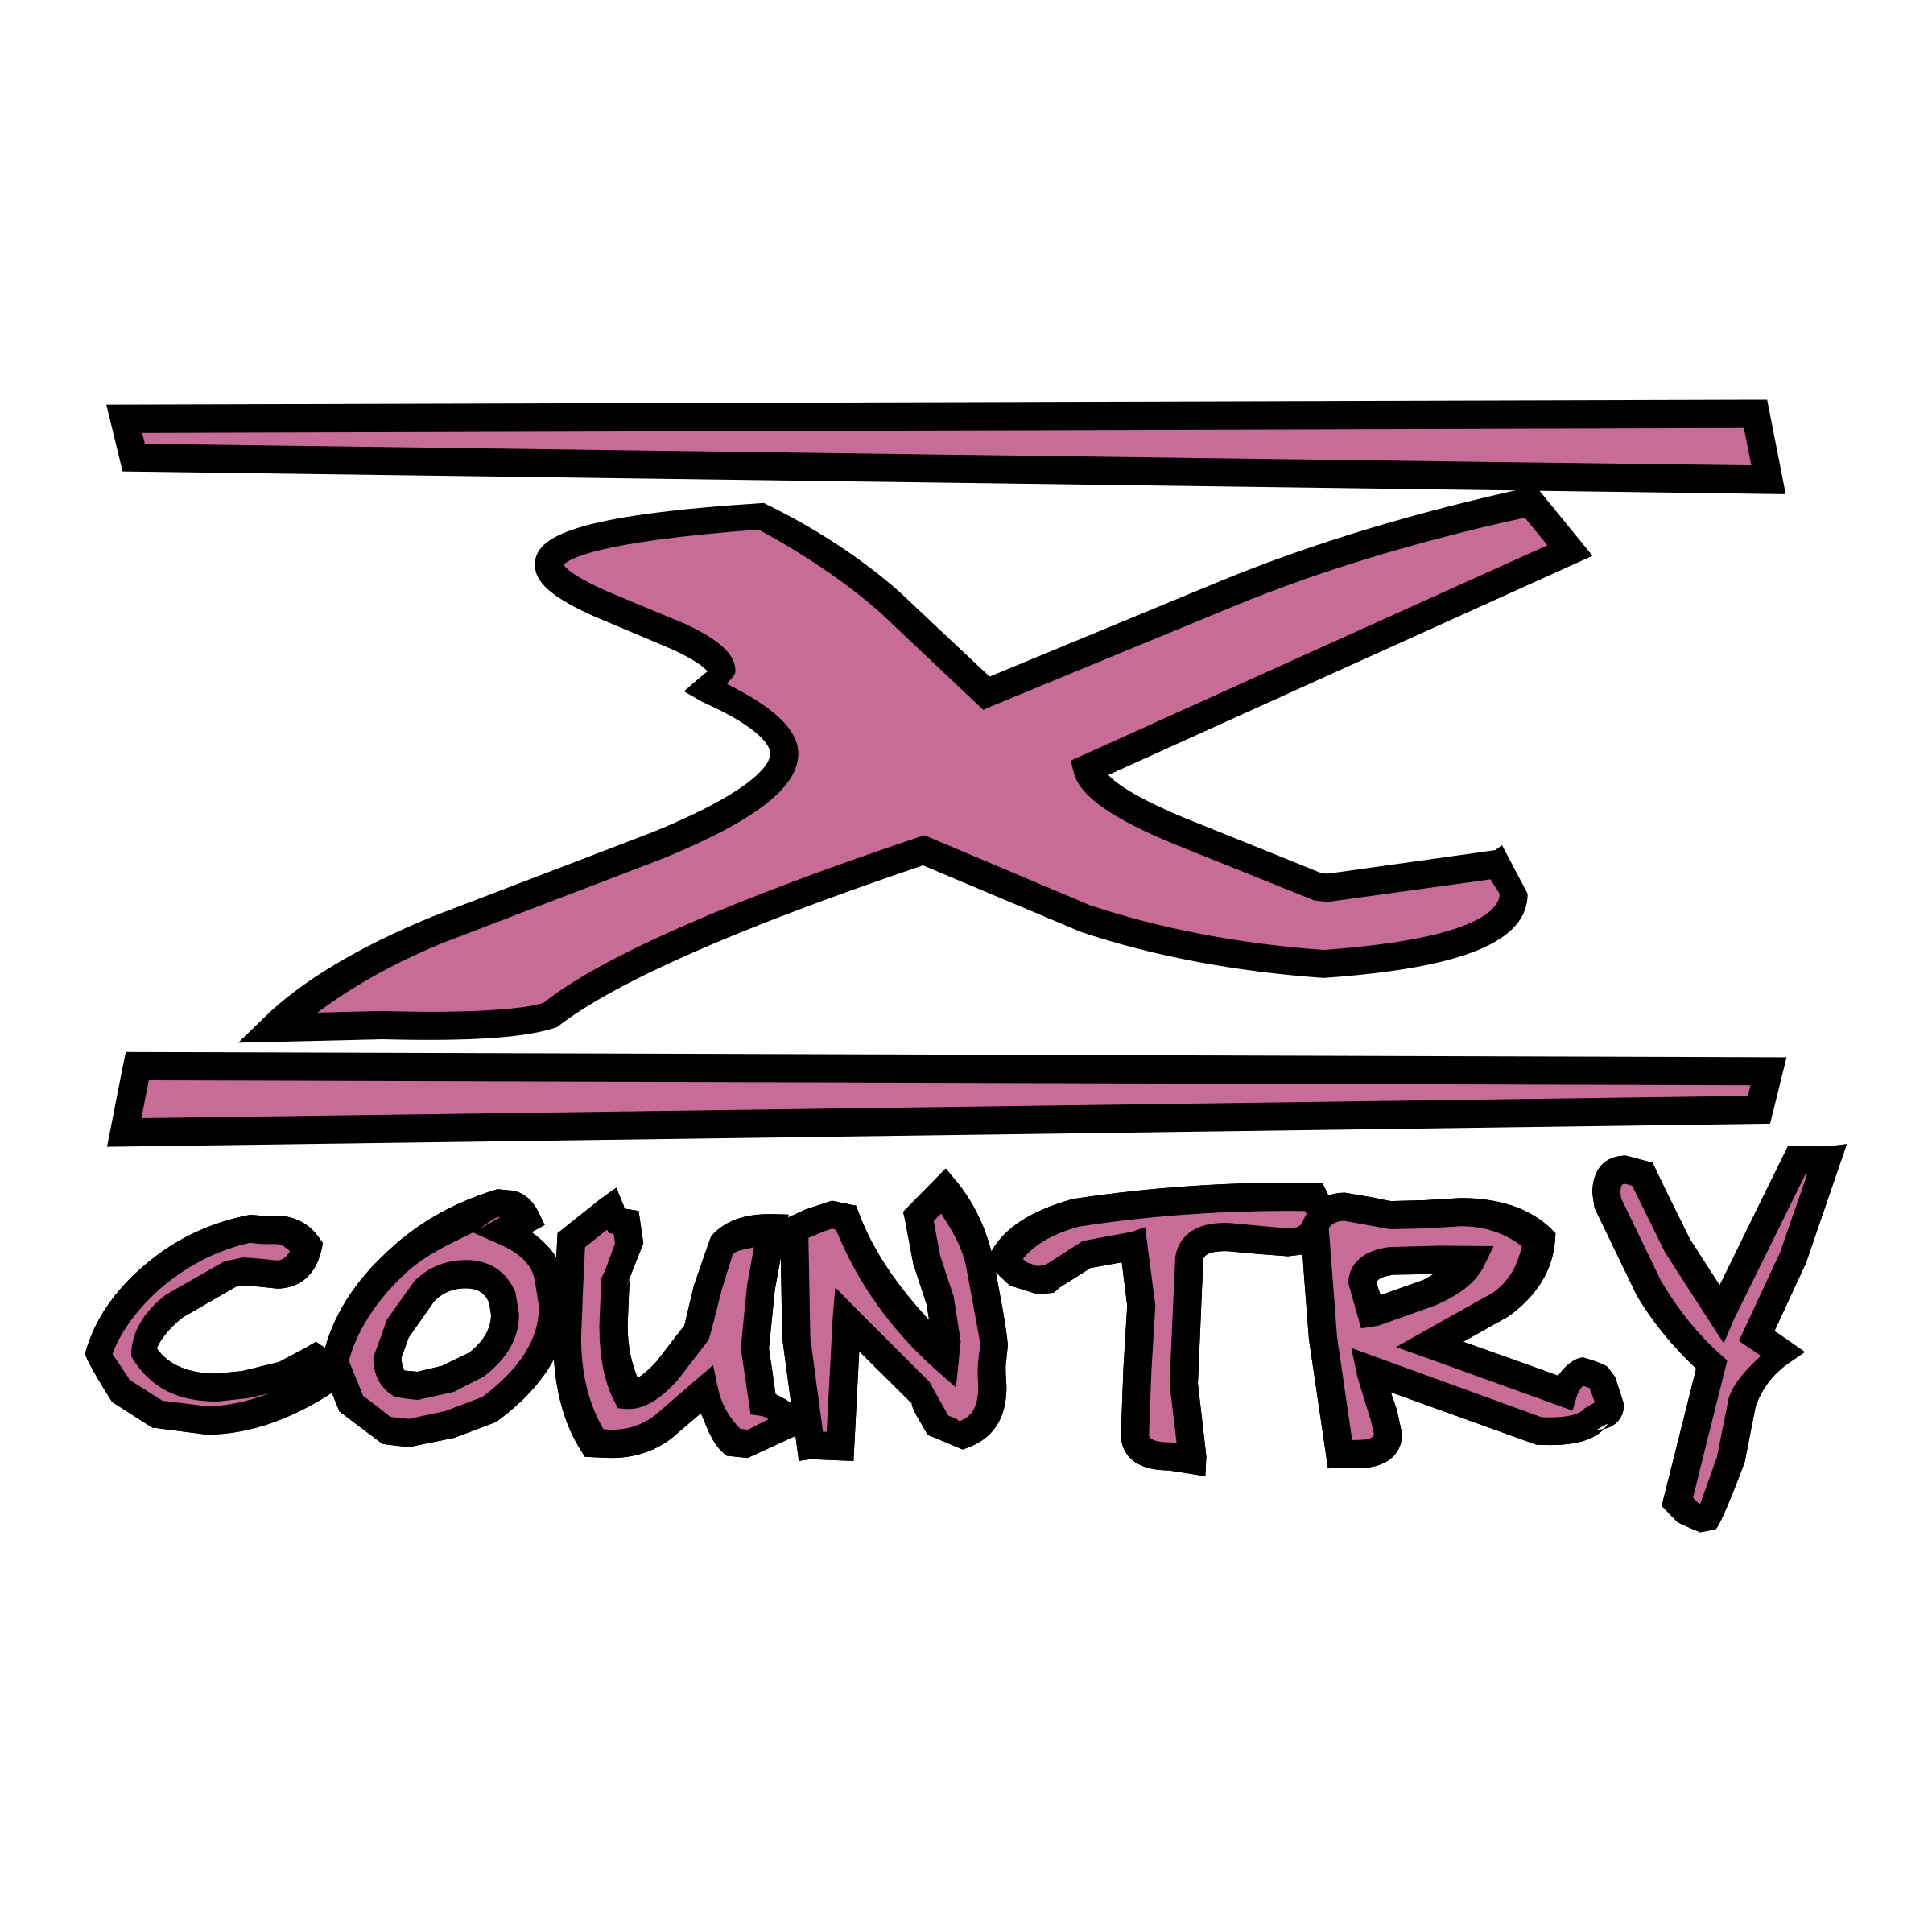 X-Country Logo - X Country Logo PNG Transparent & SVG Vector